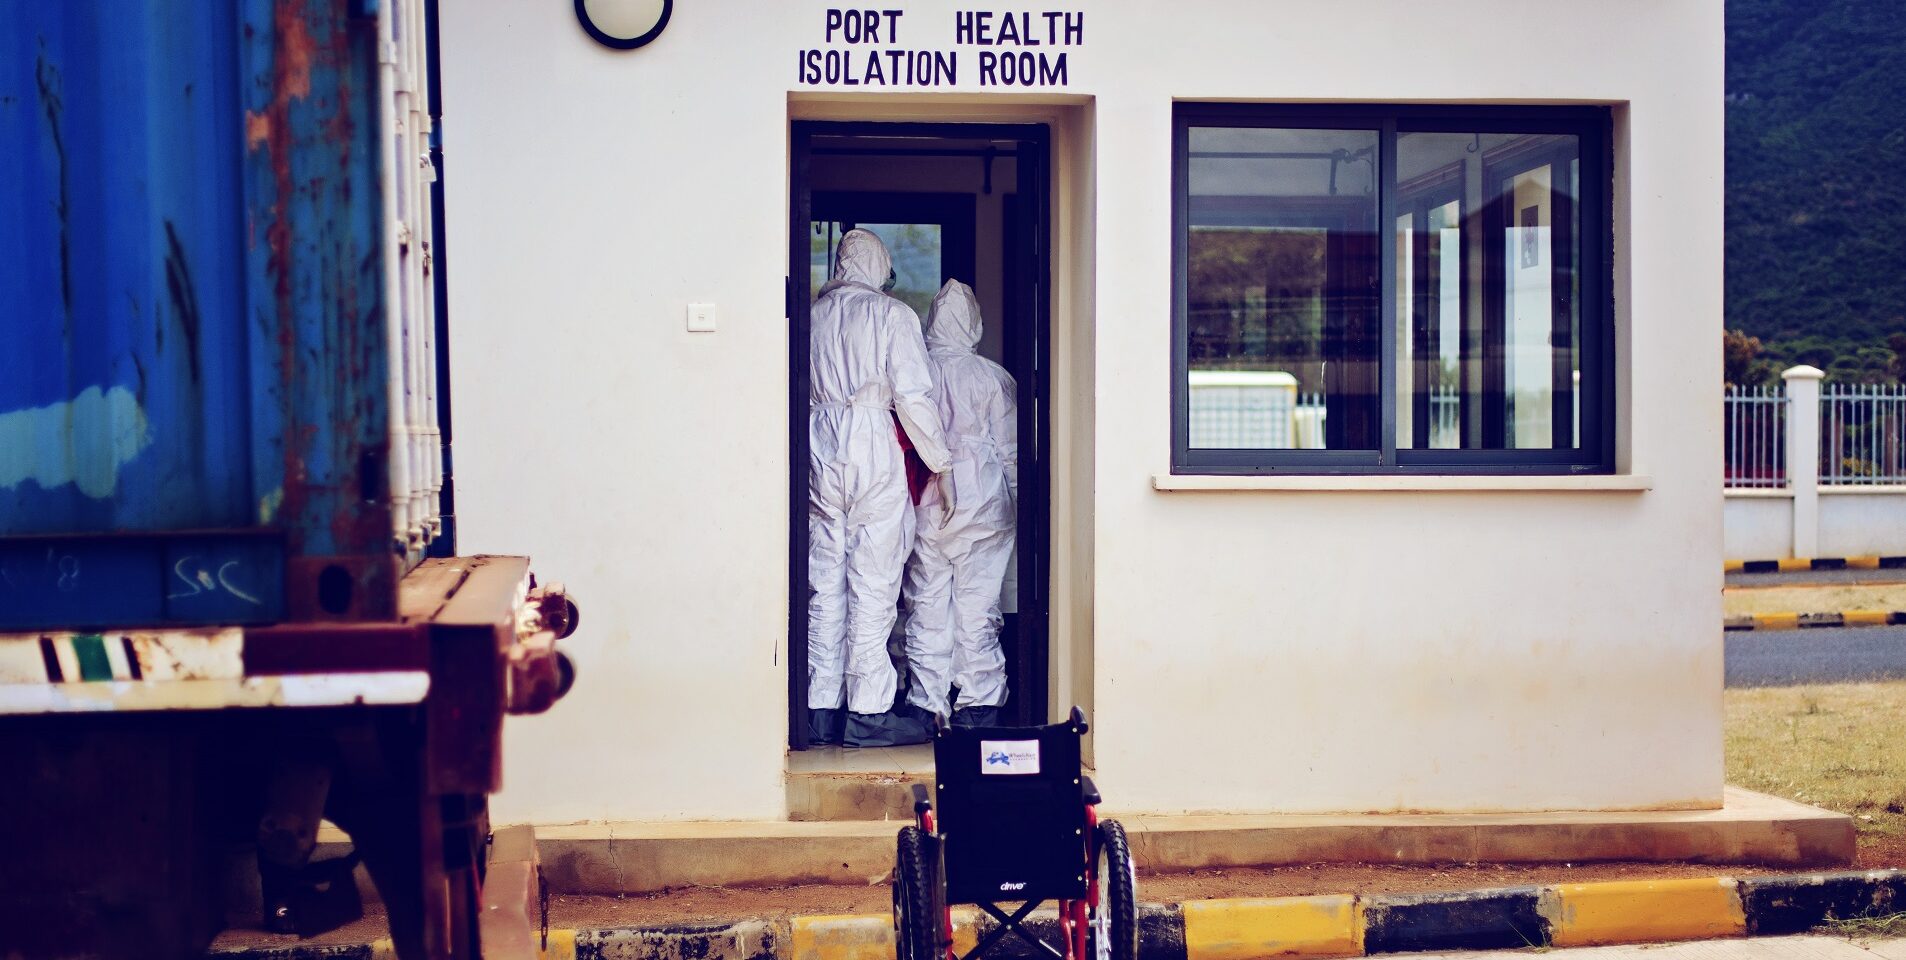 Image of two people in hazmat suits standing inside a doorway with 